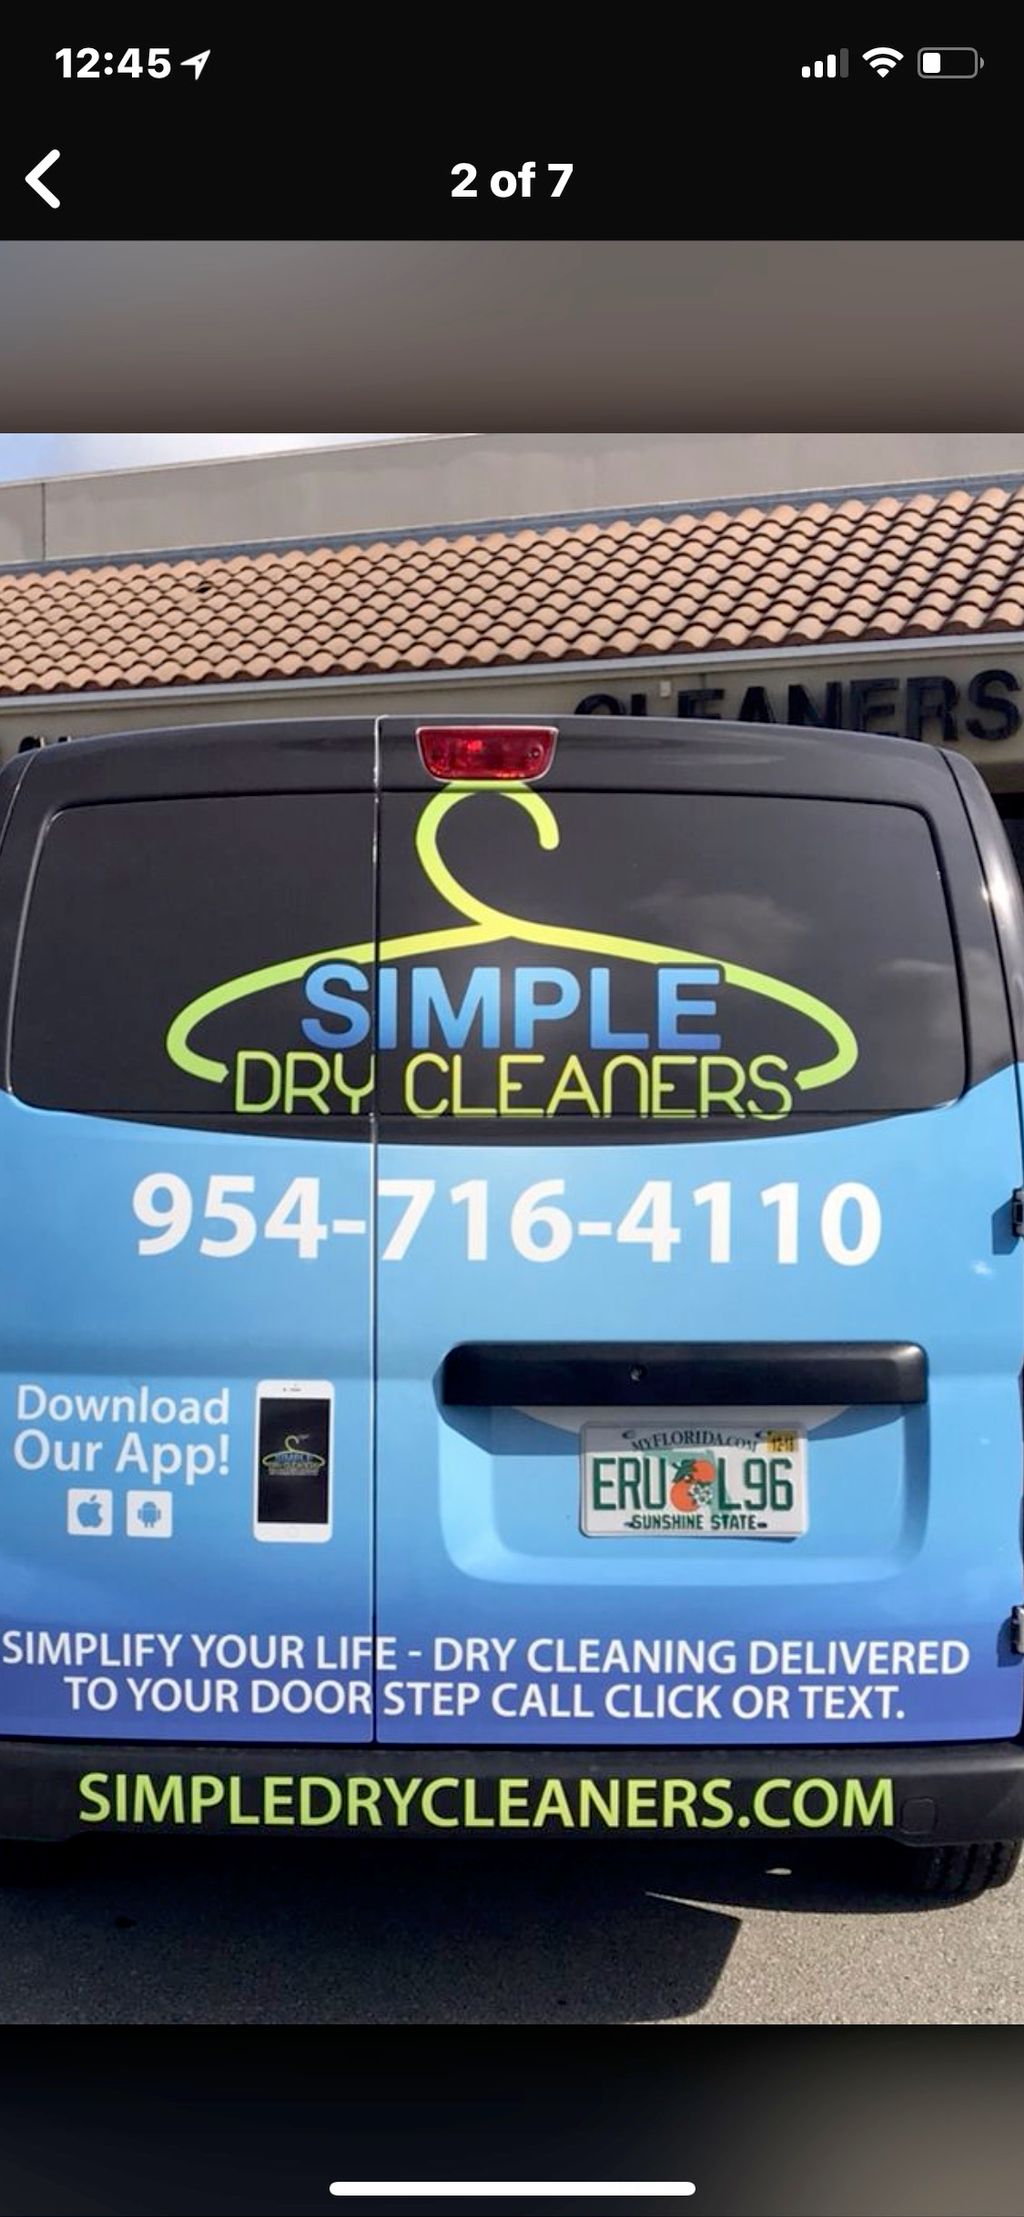 SIMPLE DRY CLEANERS